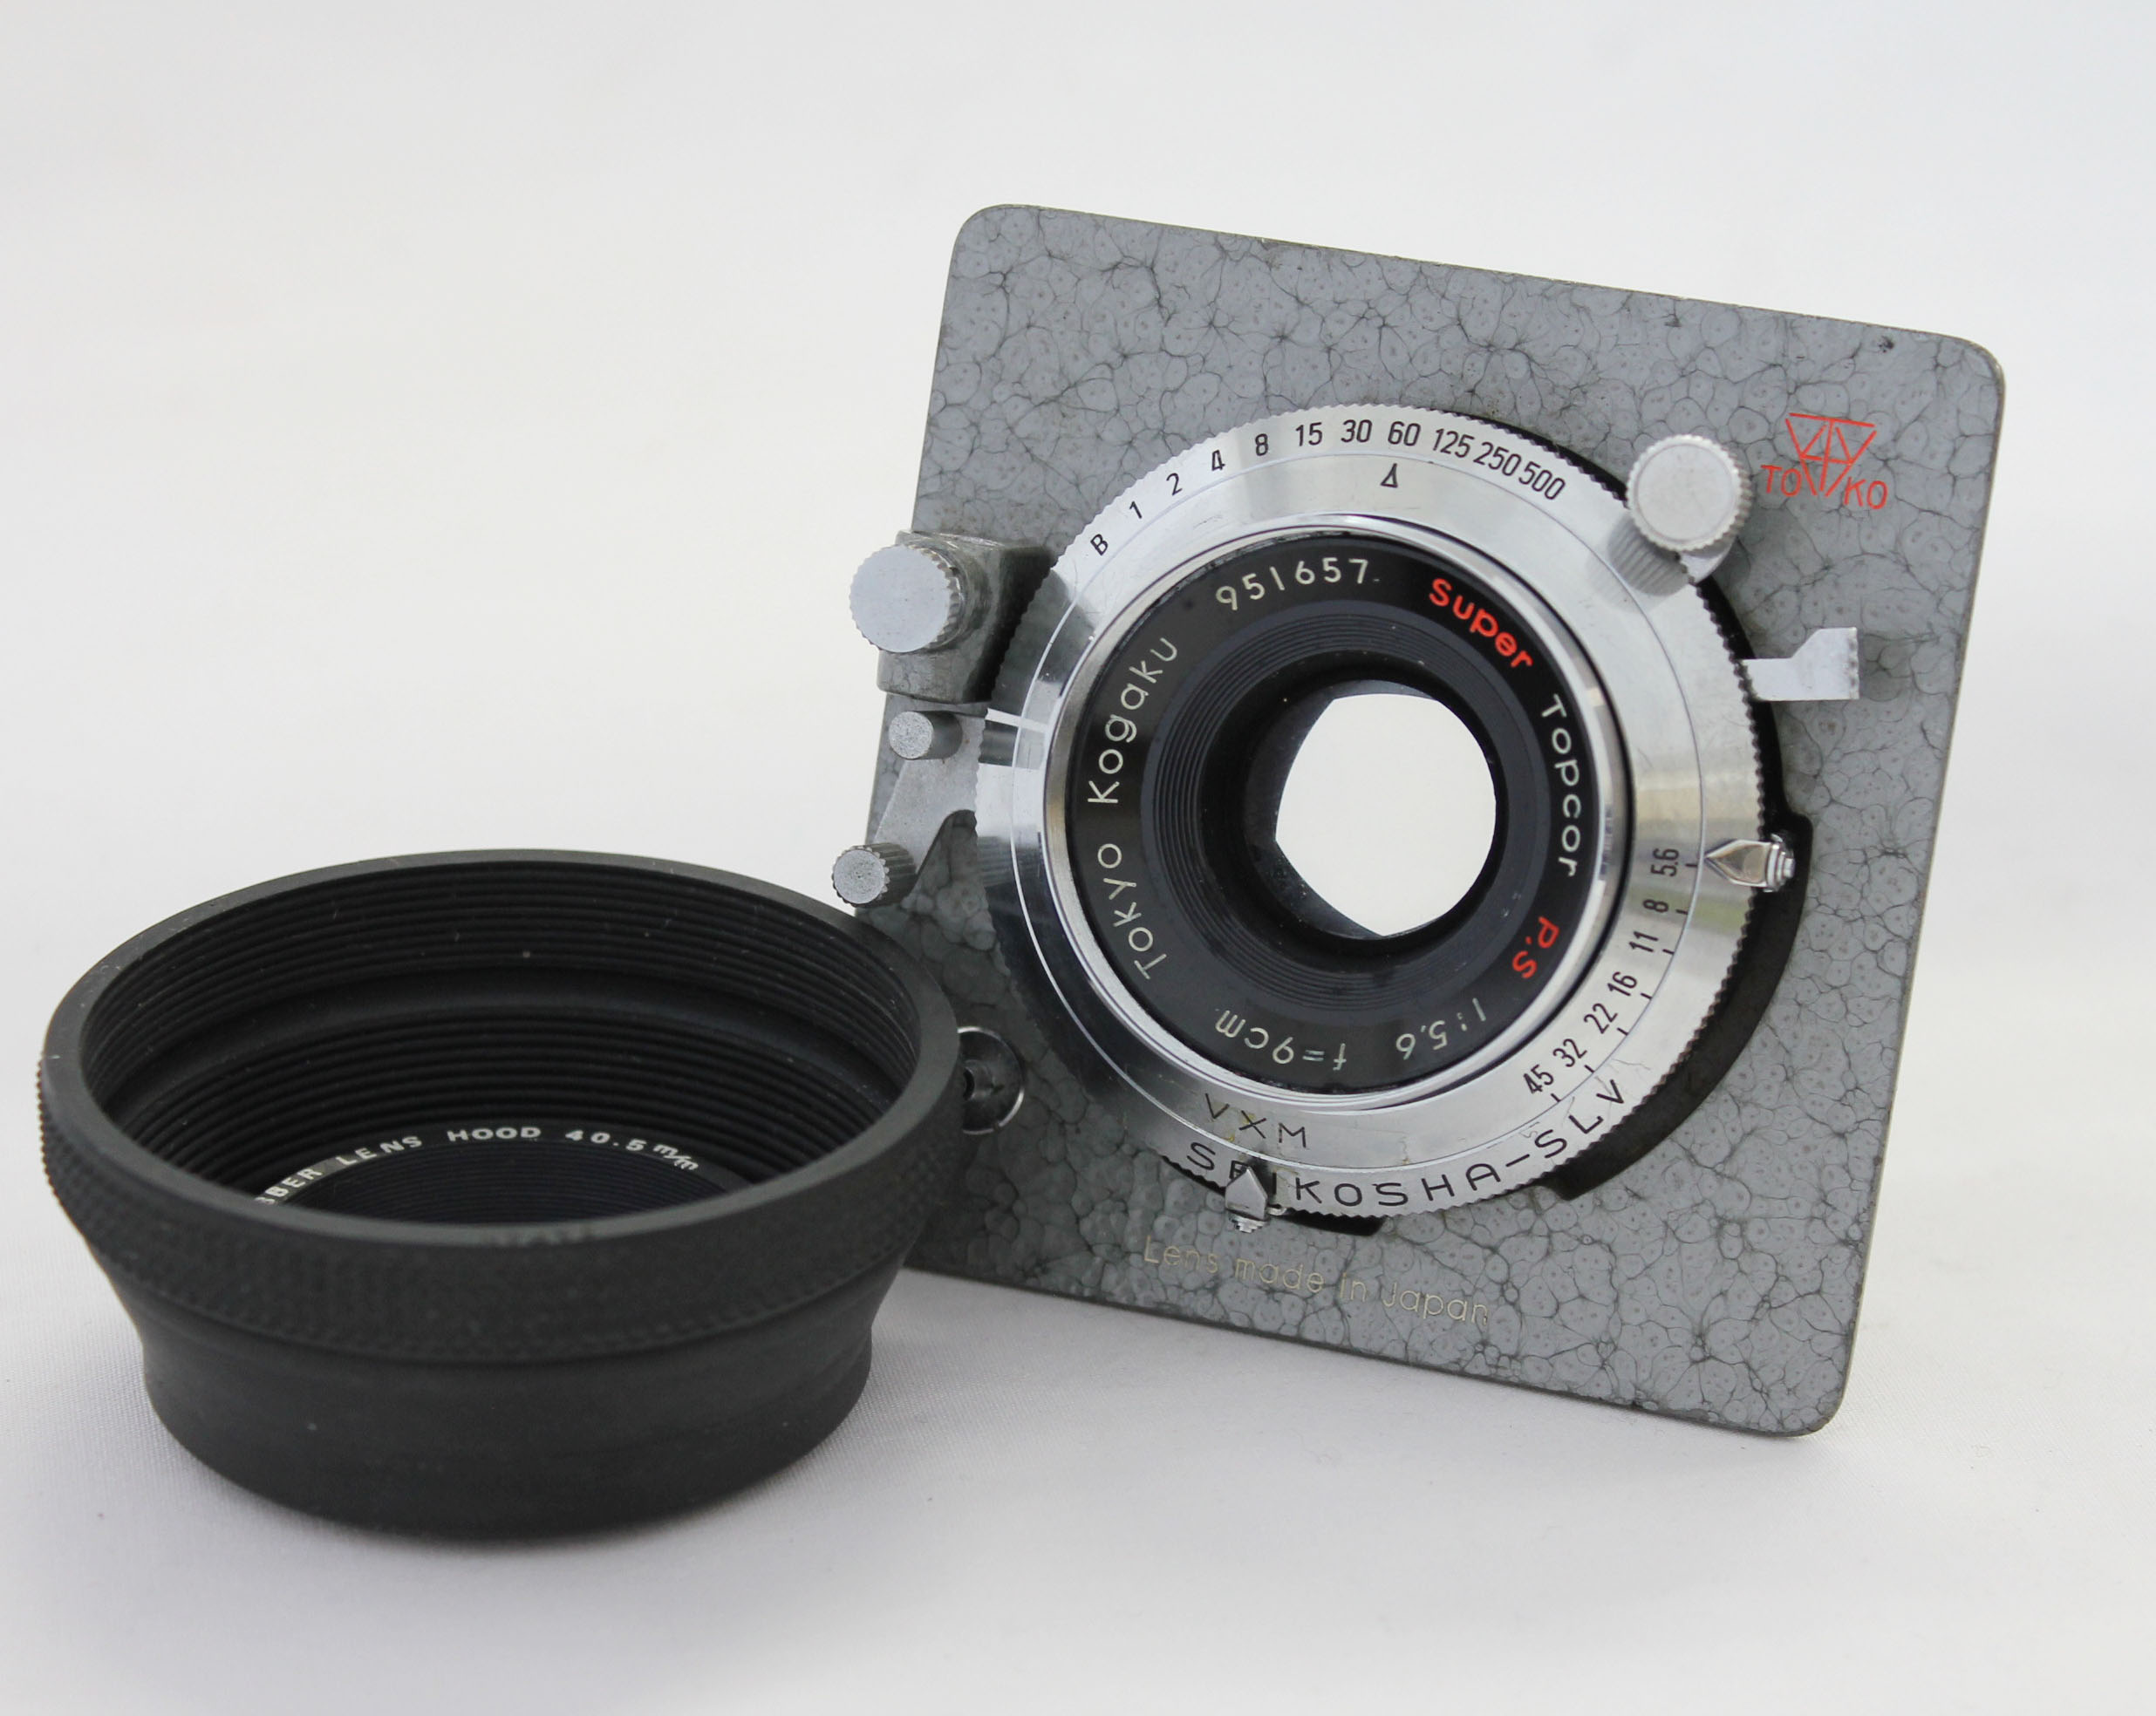 Super Topcor PS 9cm 90mm F/5.6 Seiko Shutter Horseman Board with Rubber Lens Food from Japan